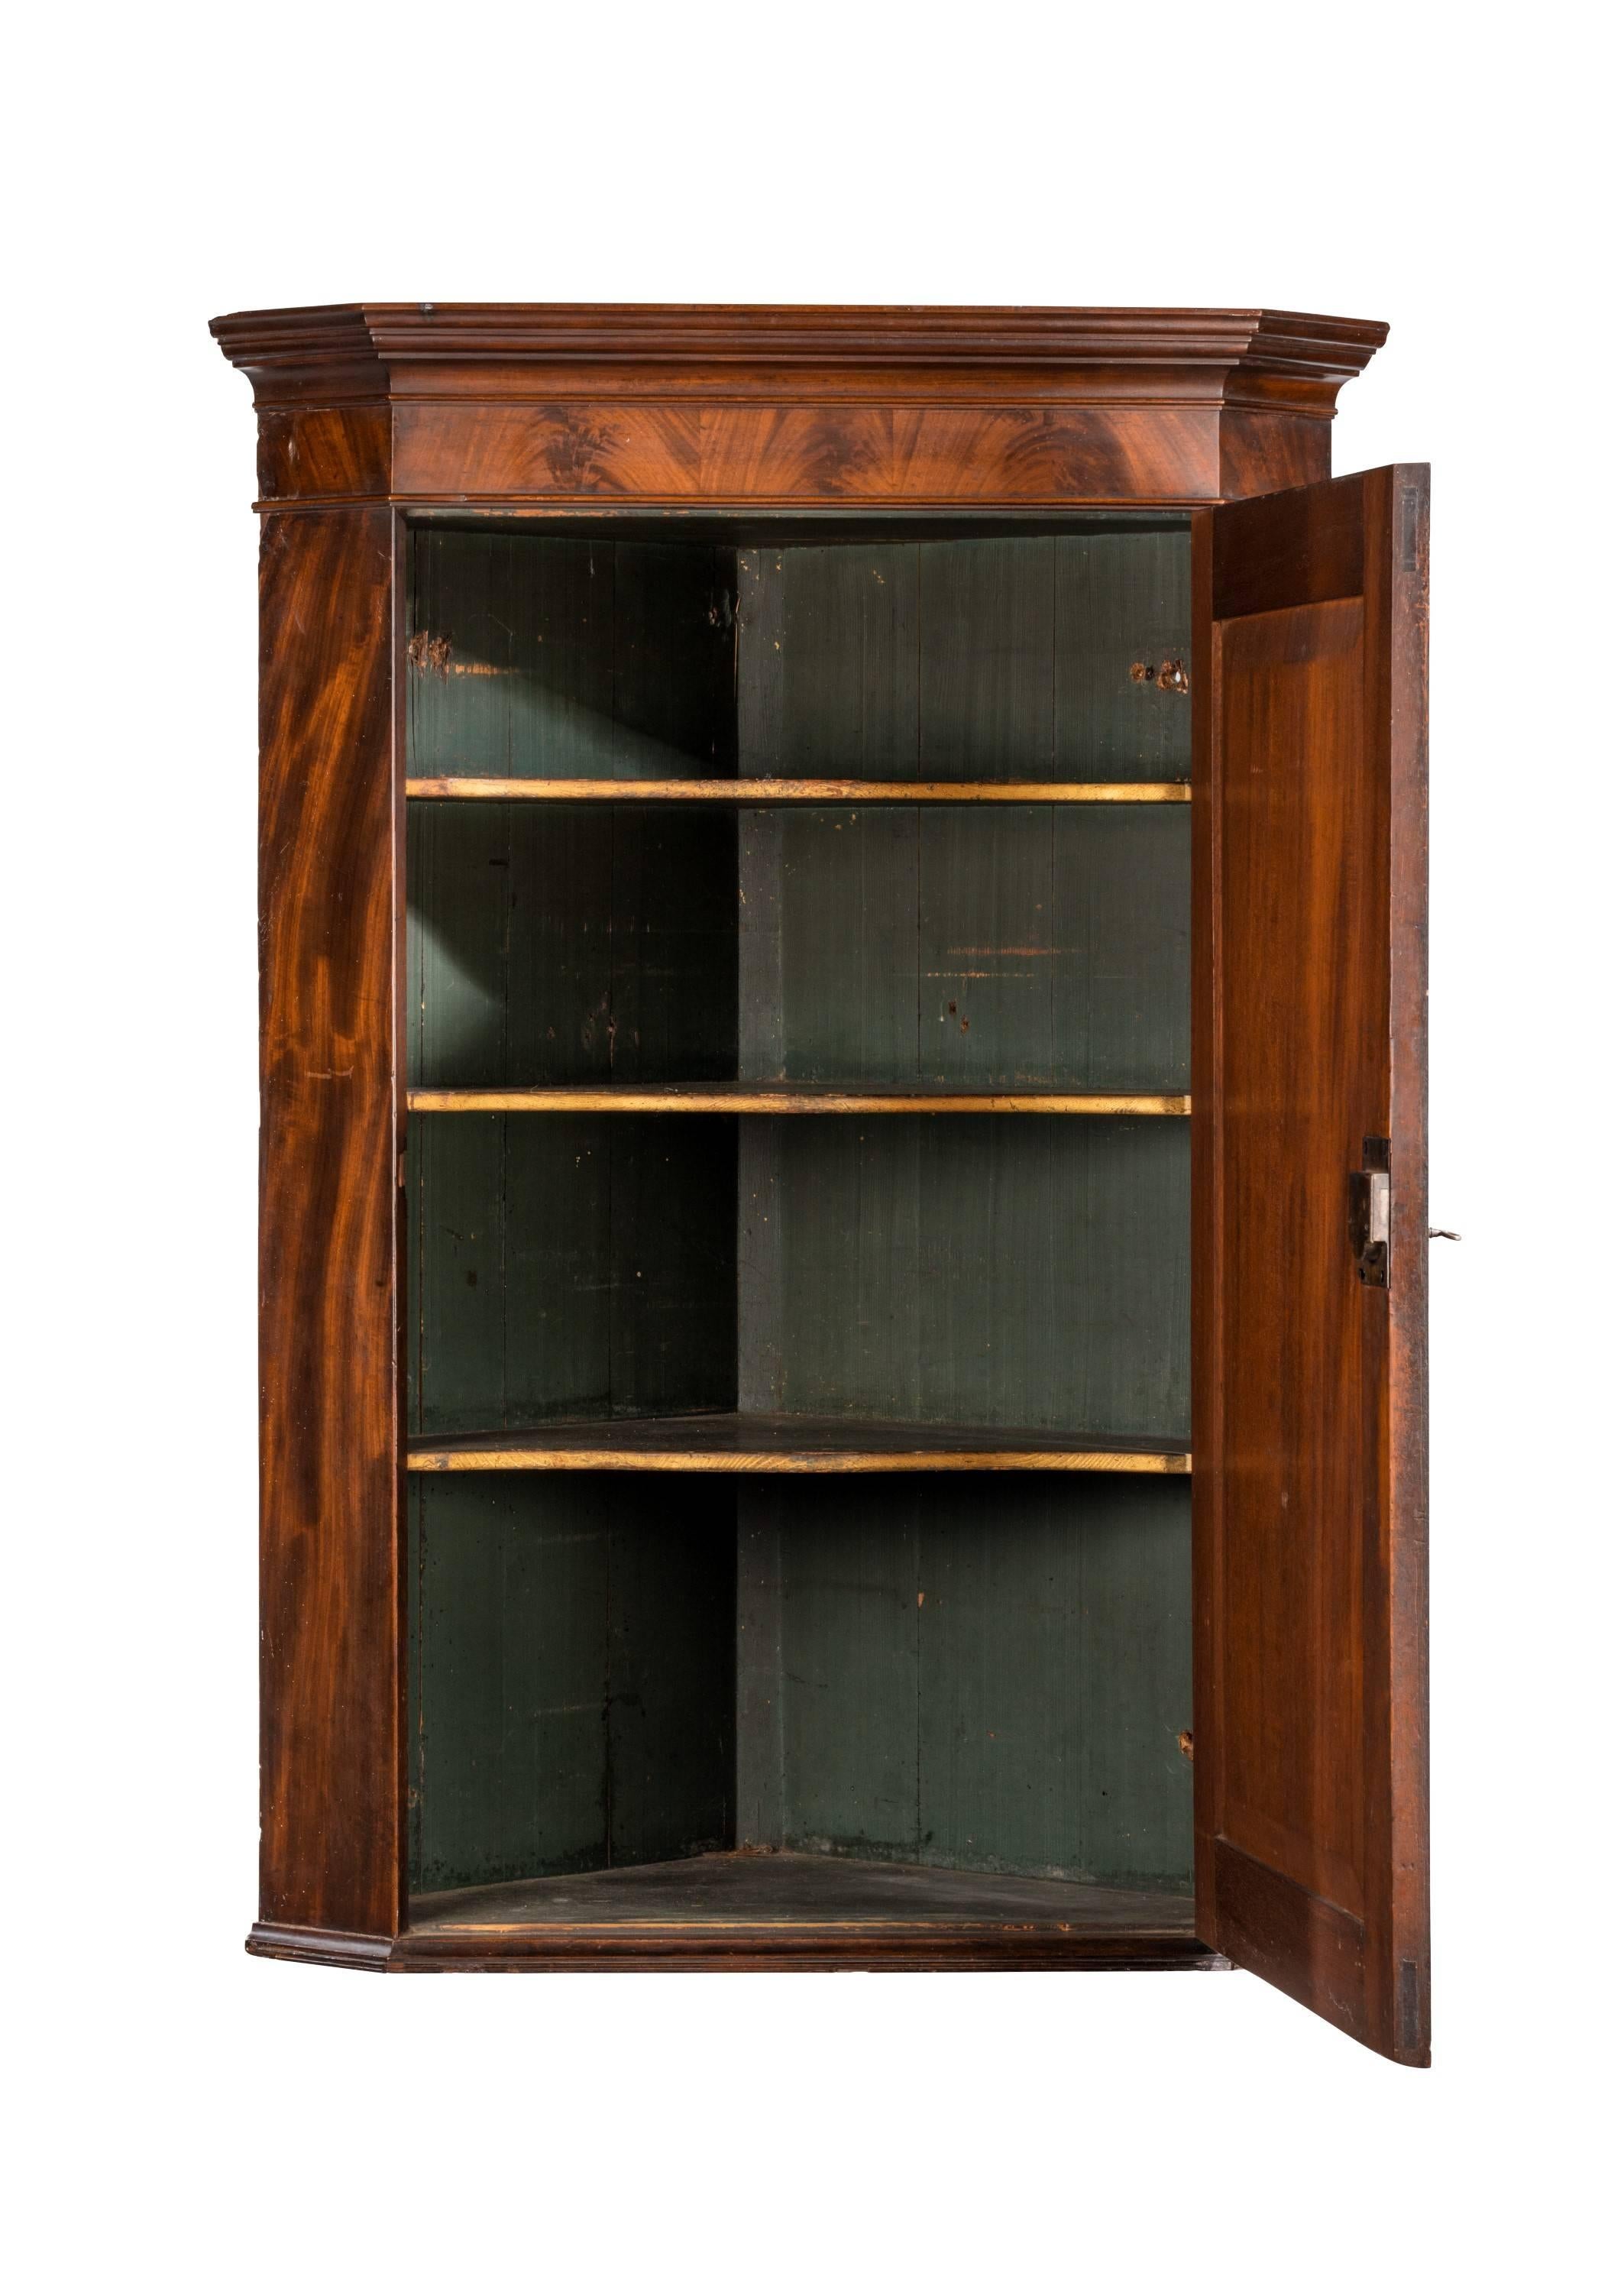 A very finely figured and good quality late George III period mahogany corner cupboard. Flared center panel. Crossbanded in matching timbers. Four shaped shelves to the interior.